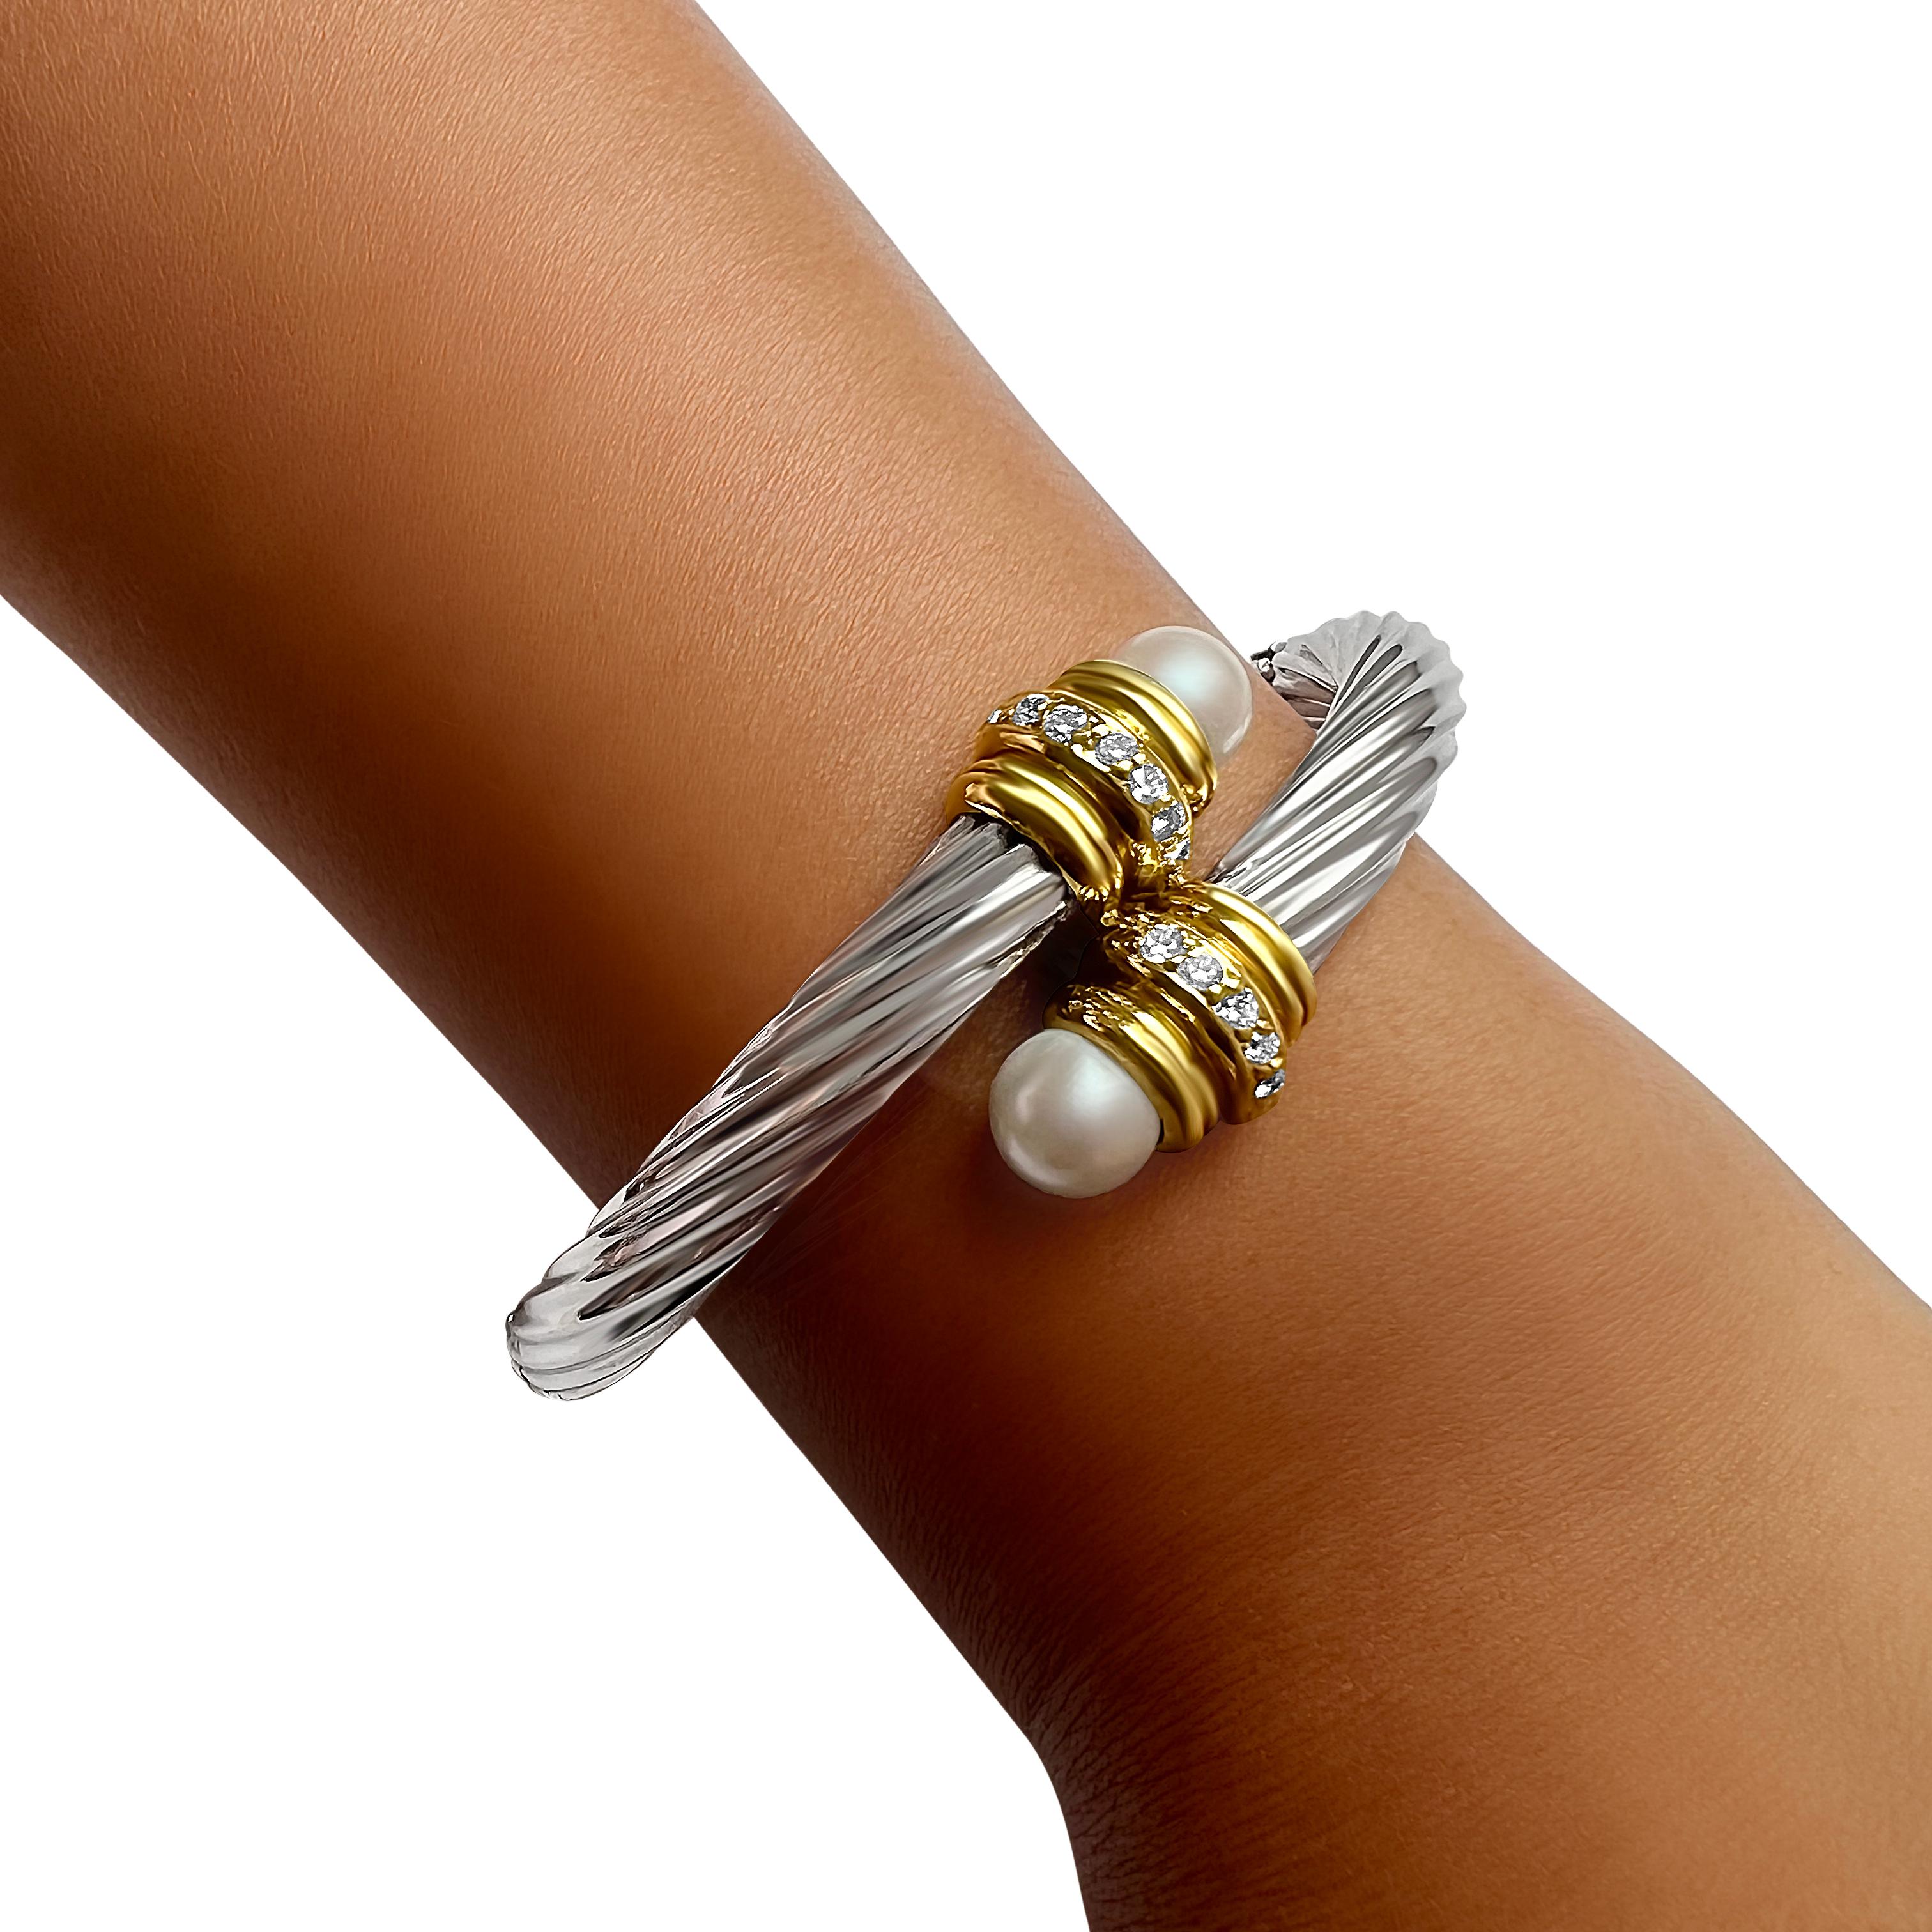 18K Two-Tone Wrap Bangle with Diamonds (0.60ct)  & 2 Pearls by Manart In New Condition For Sale In New Orleans, LA